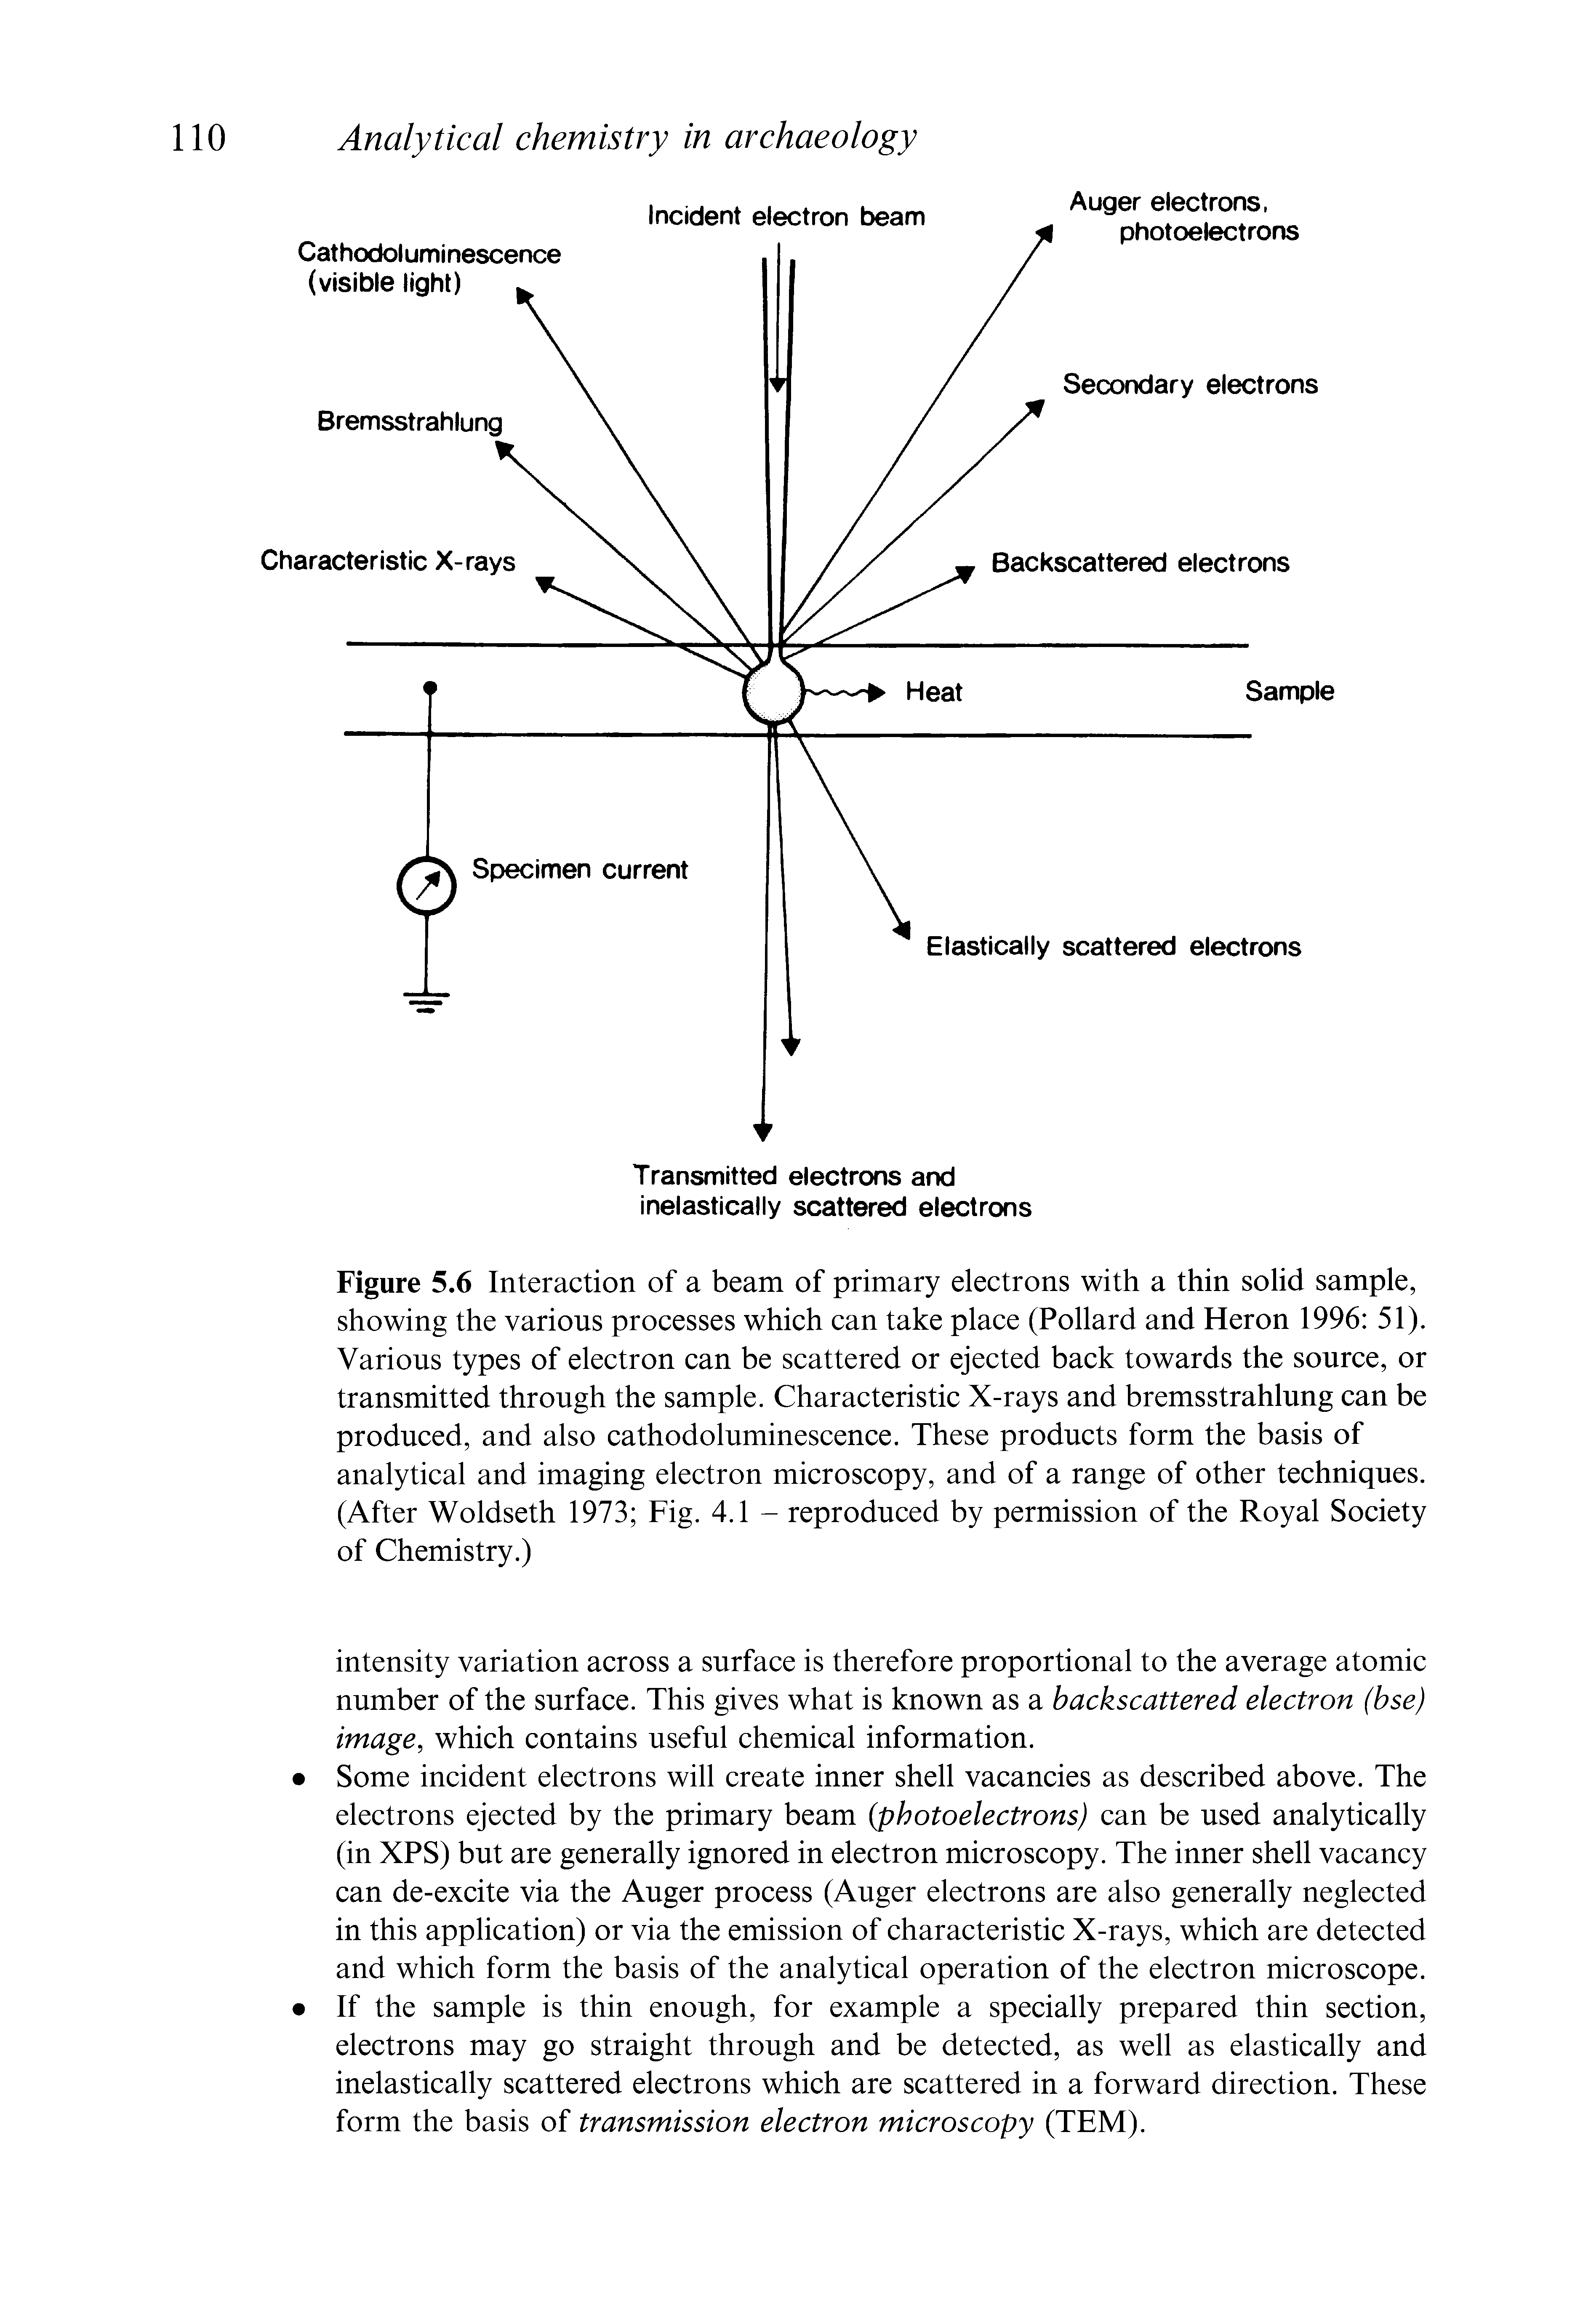 Figure 5.6 Interaction of a beam of primary electrons with a thin solid sample, showing the various processes which can take place (Pollard and Heron 1996 51). Various types of electron can be scattered or ejected back towards the source, or transmitted through the sample. Characteristic X-rays and bremsstrahlung can be produced, and also cathodoluminescence. These products form the basis of analytical and imaging electron microscopy, and of a range of other techniques. (After Woldseth 1973 Fig. 4.1 - reproduced by permission of the Royal Society of Chemistry.)...